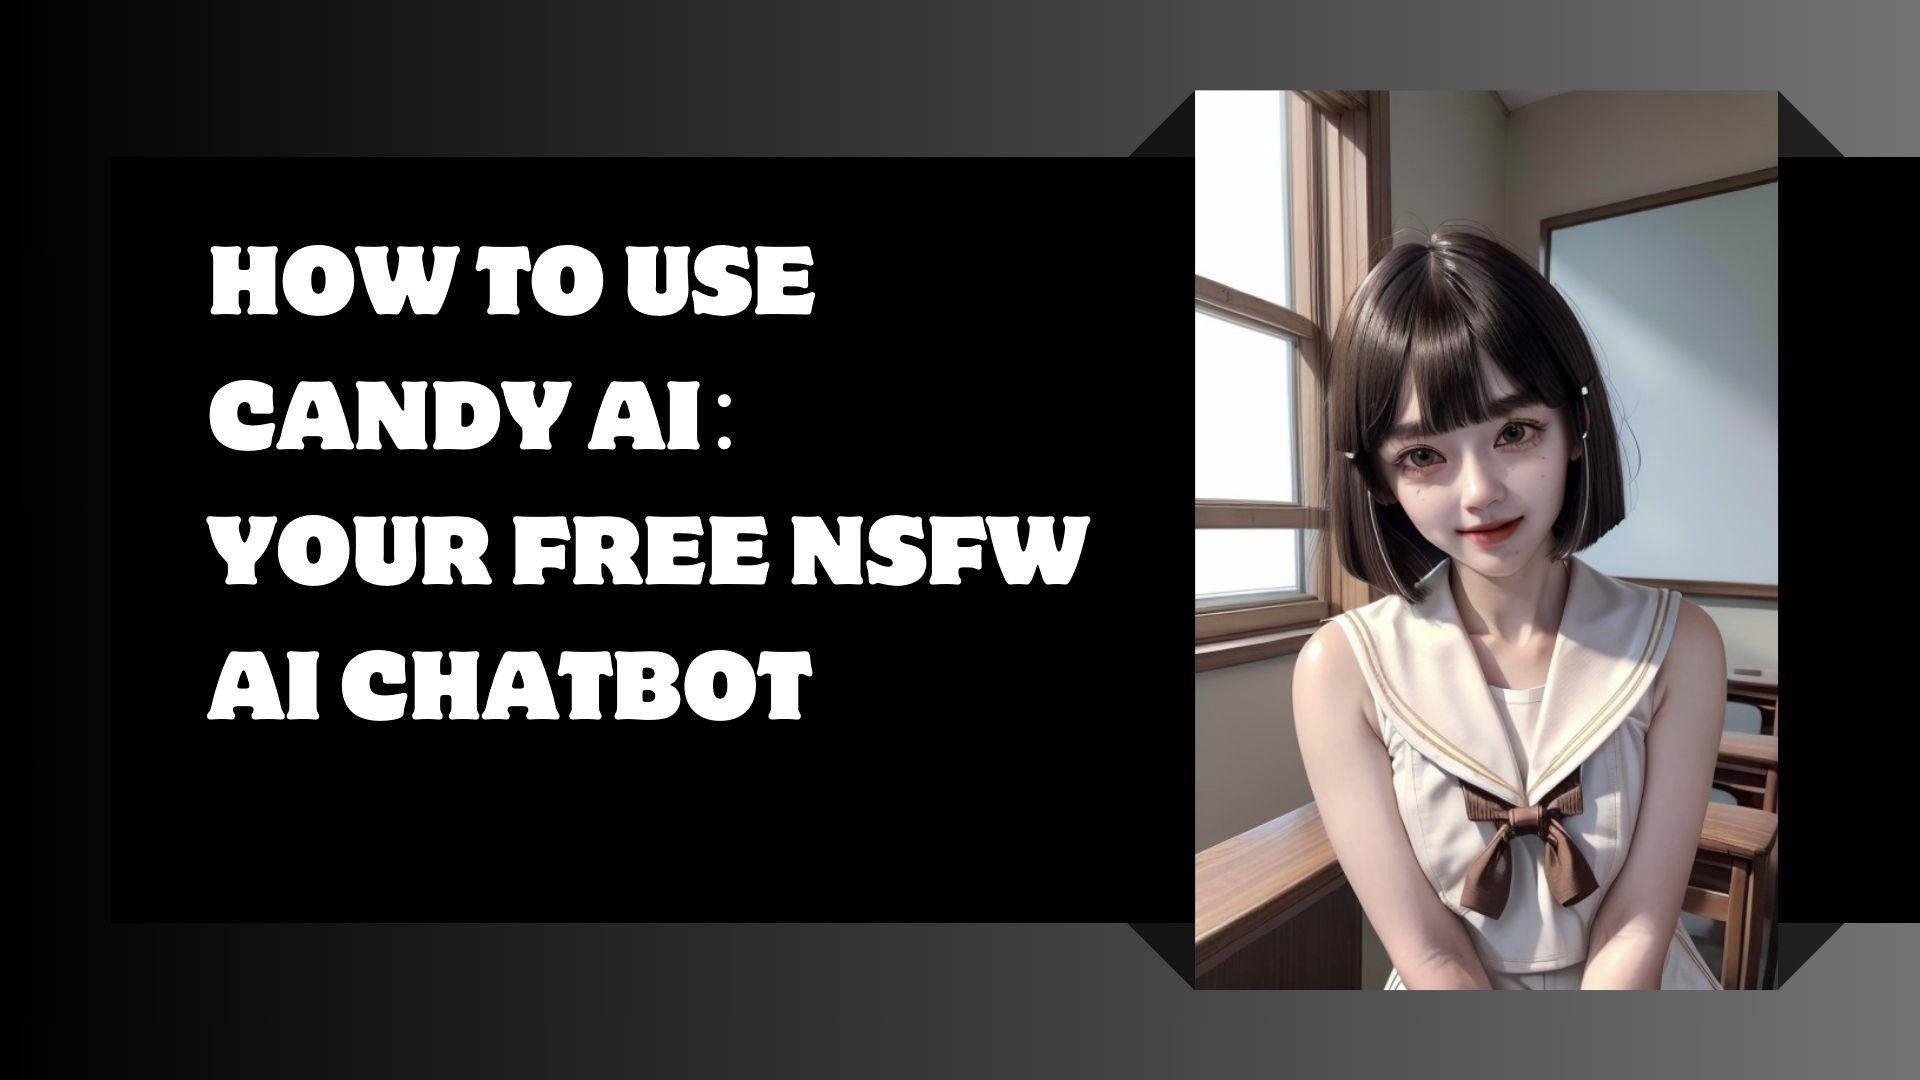 How To Use Candy AI：Your Free NSFW AI Chatbot